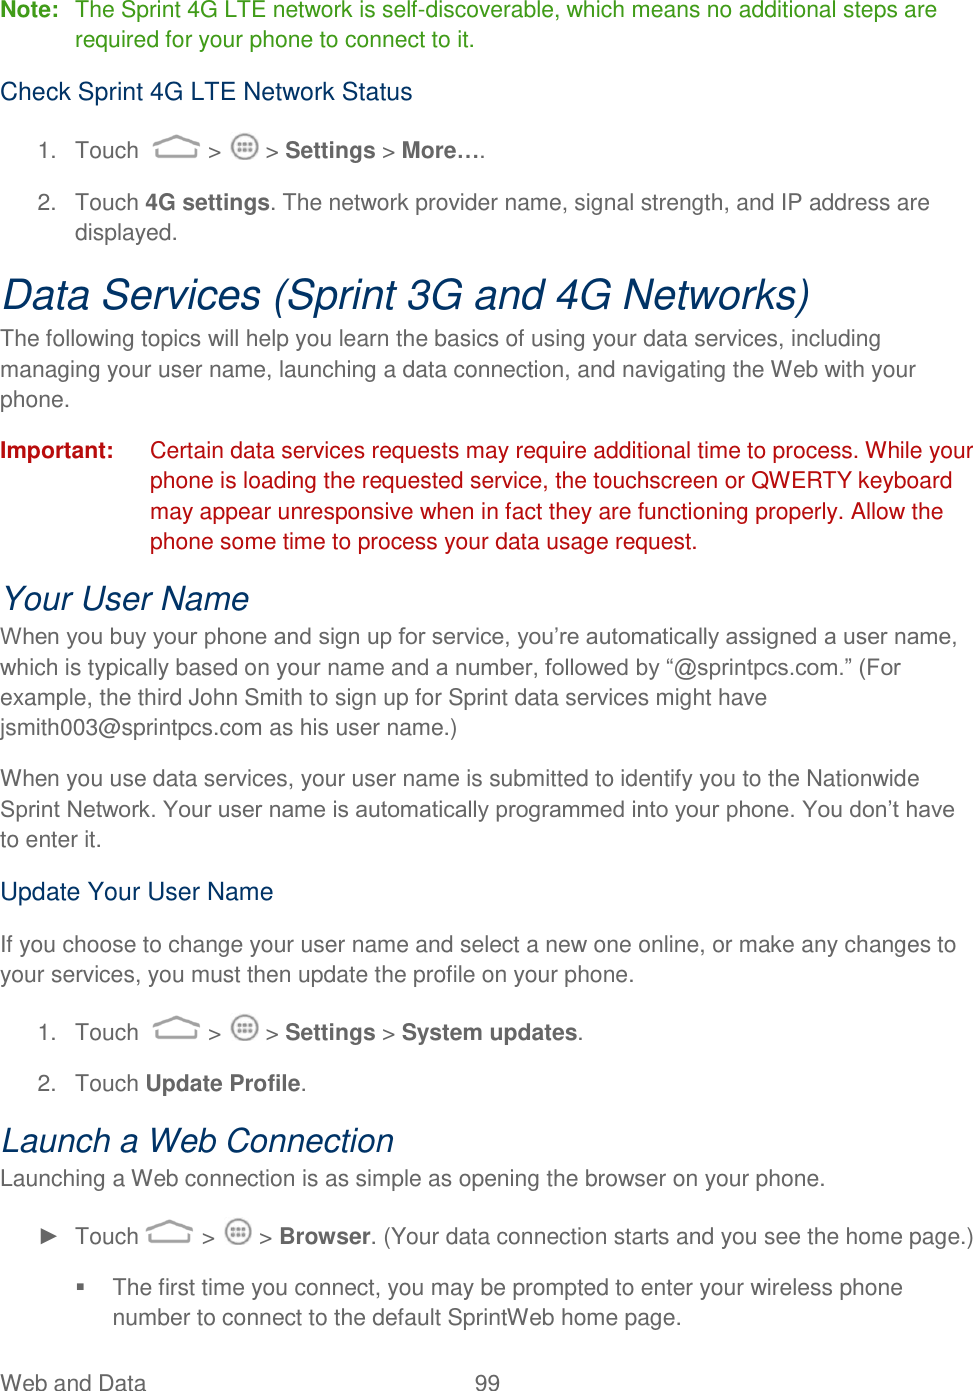 Web and Data  99   Note:  The Sprint 4G LTE network is self-discoverable, which means no additional steps are required for your phone to connect to it. Check Sprint 4G LTE Network Status 1.  Touch   &gt;   &gt; Settings &gt; More…. 2.  Touch 4G settings. The network provider name, signal strength, and IP address are displayed. Data Services (Sprint 3G and 4G Networks) The following topics will help you learn the basics of using your data services, including managing your user name, launching a data connection, and navigating the Web with your phone. Important:  Certain data services requests may require additional time to process. While your phone is loading the requested service, the touchscreen or QWERTY keyboard may appear unresponsive when in fact they are functioning properly. Allow the phone some time to process your data usage request. Your User Name When you buy your phone and sign up for service, you‟re automatically assigned a user name, which is typically based on your name and a number, followed by “@sprintpcs.com.” (For example, the third John Smith to sign up for Sprint data services might have jsmith003@sprintpcs.com as his user name.) When you use data services, your user name is submitted to identify you to the Nationwide Sprint Network. Your user name is automatically programmed into your phone. You don‟t have to enter it. Update Your User Name If you choose to change your user name and select a new one online, or make any changes to your services, you must then update the profile on your phone. 1.  Touch   &gt;   &gt; Settings &gt; System updates.  2.  Touch Update Profile. Launch a Web Connection  Launching a Web connection is as simple as opening the browser on your phone. ►  Touch  &gt;   &gt; Browser. (Your data connection starts and you see the home page.)   The first time you connect, you may be prompted to enter your wireless phone number to connect to the default SprintWeb home page. 